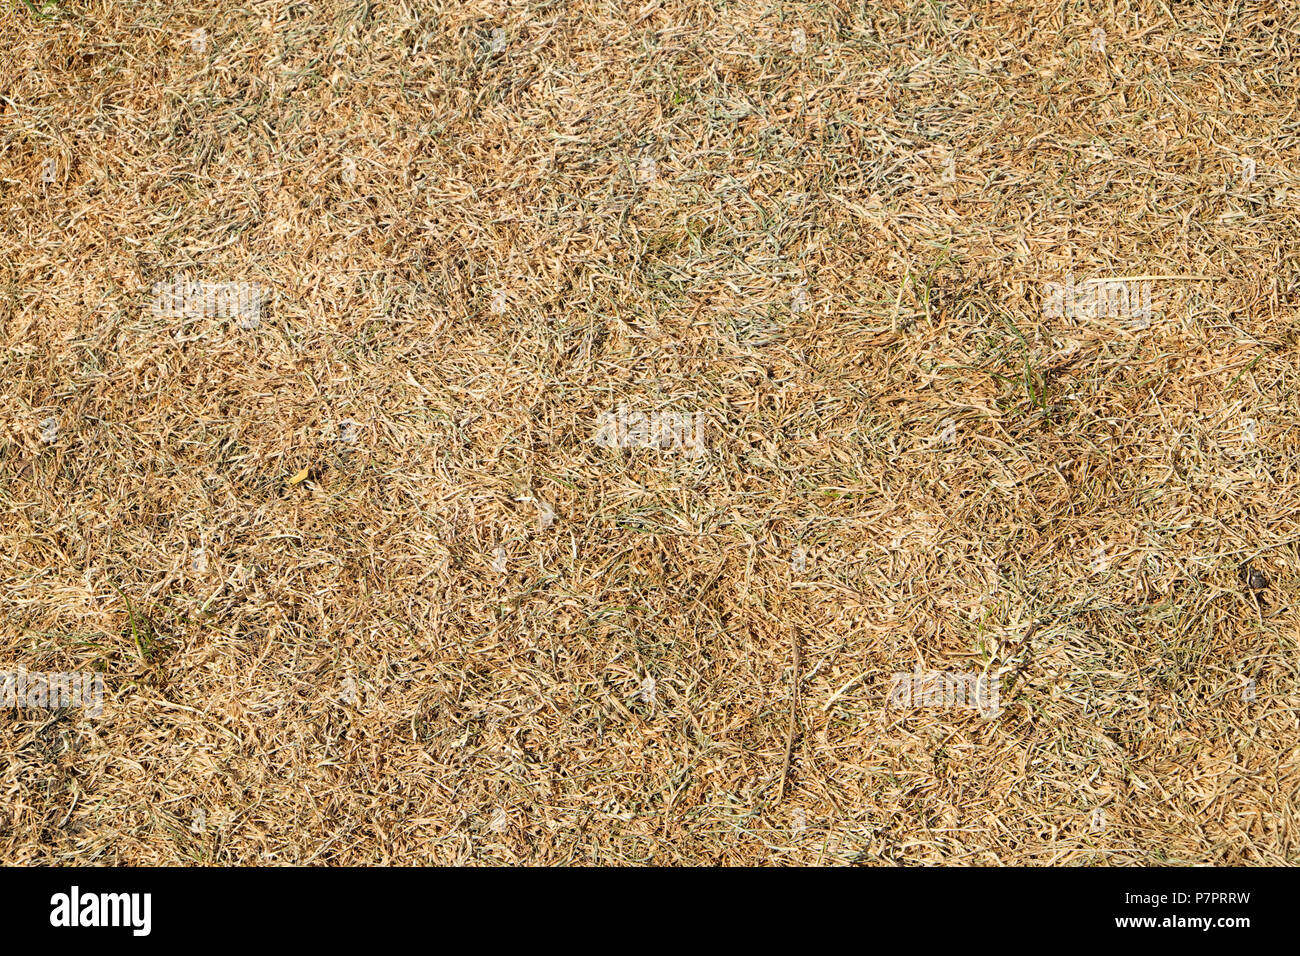 Close-up overhead view of dead grass on parched lawn in a garden in the July  2018 heatwave in Wales, Great Britain UK Stock Photo